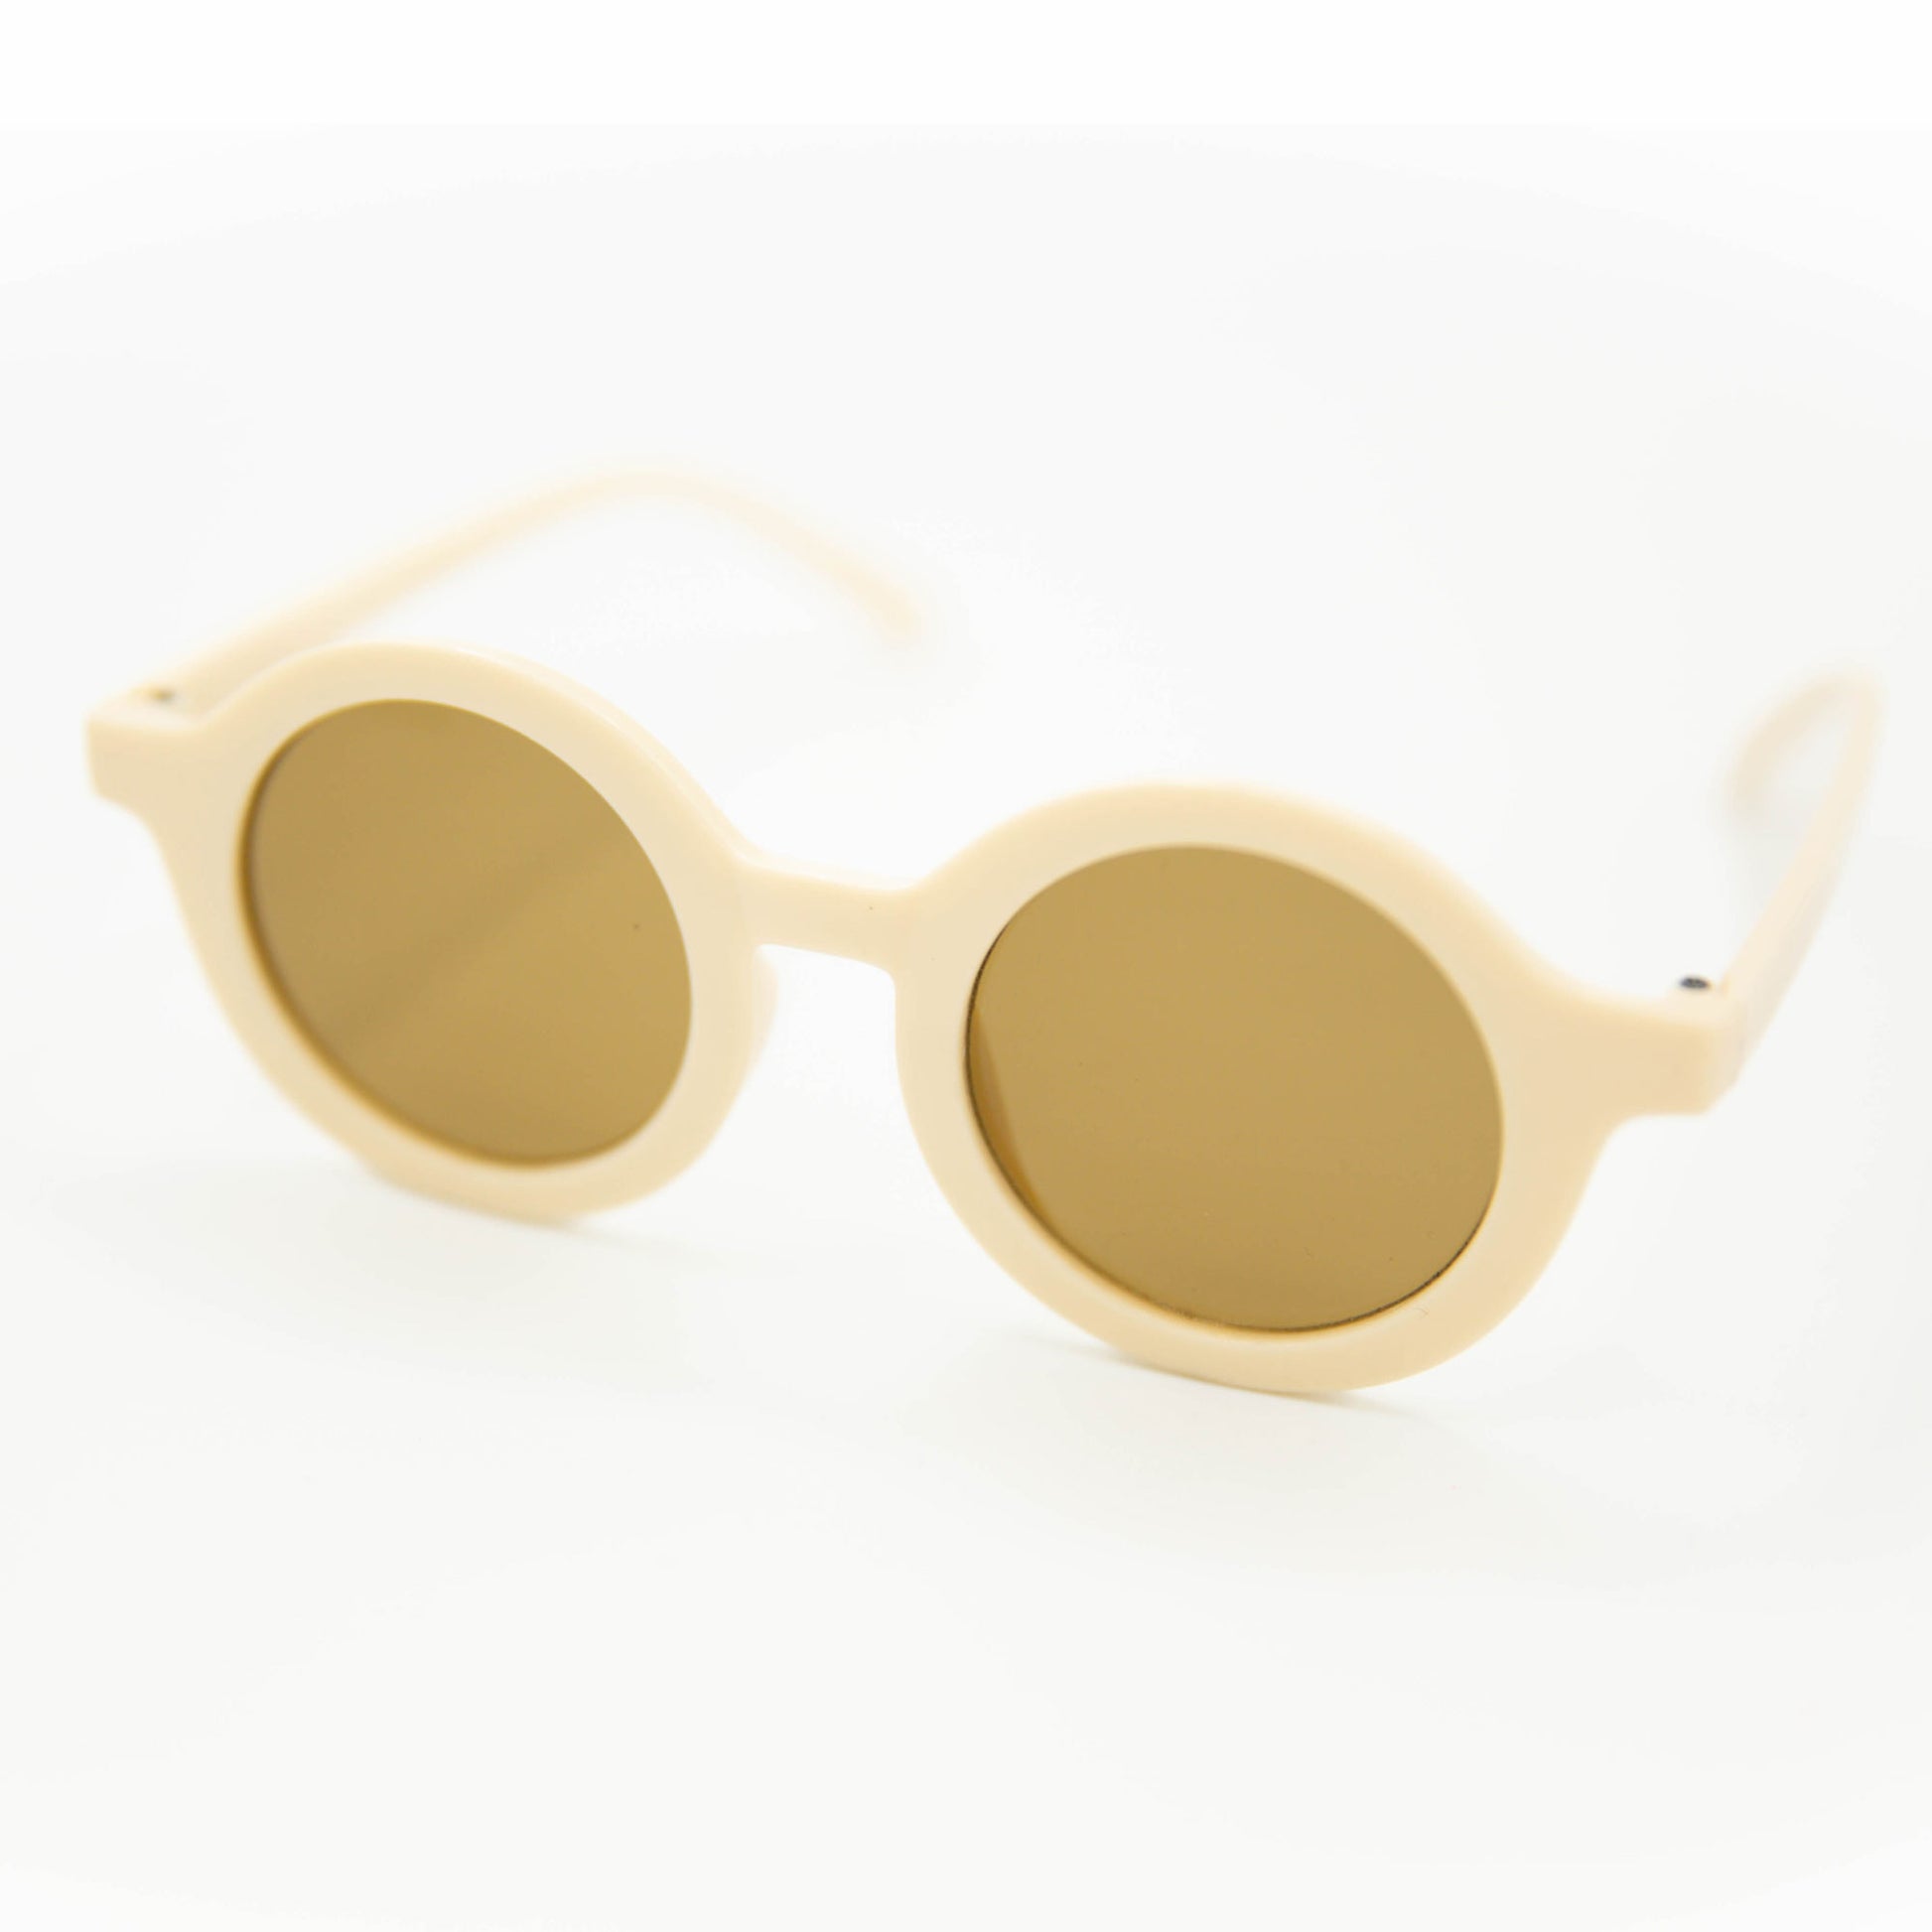 The Baby Cubby Kids' Round Retro Sunglasses - Cream with Brown Lenses